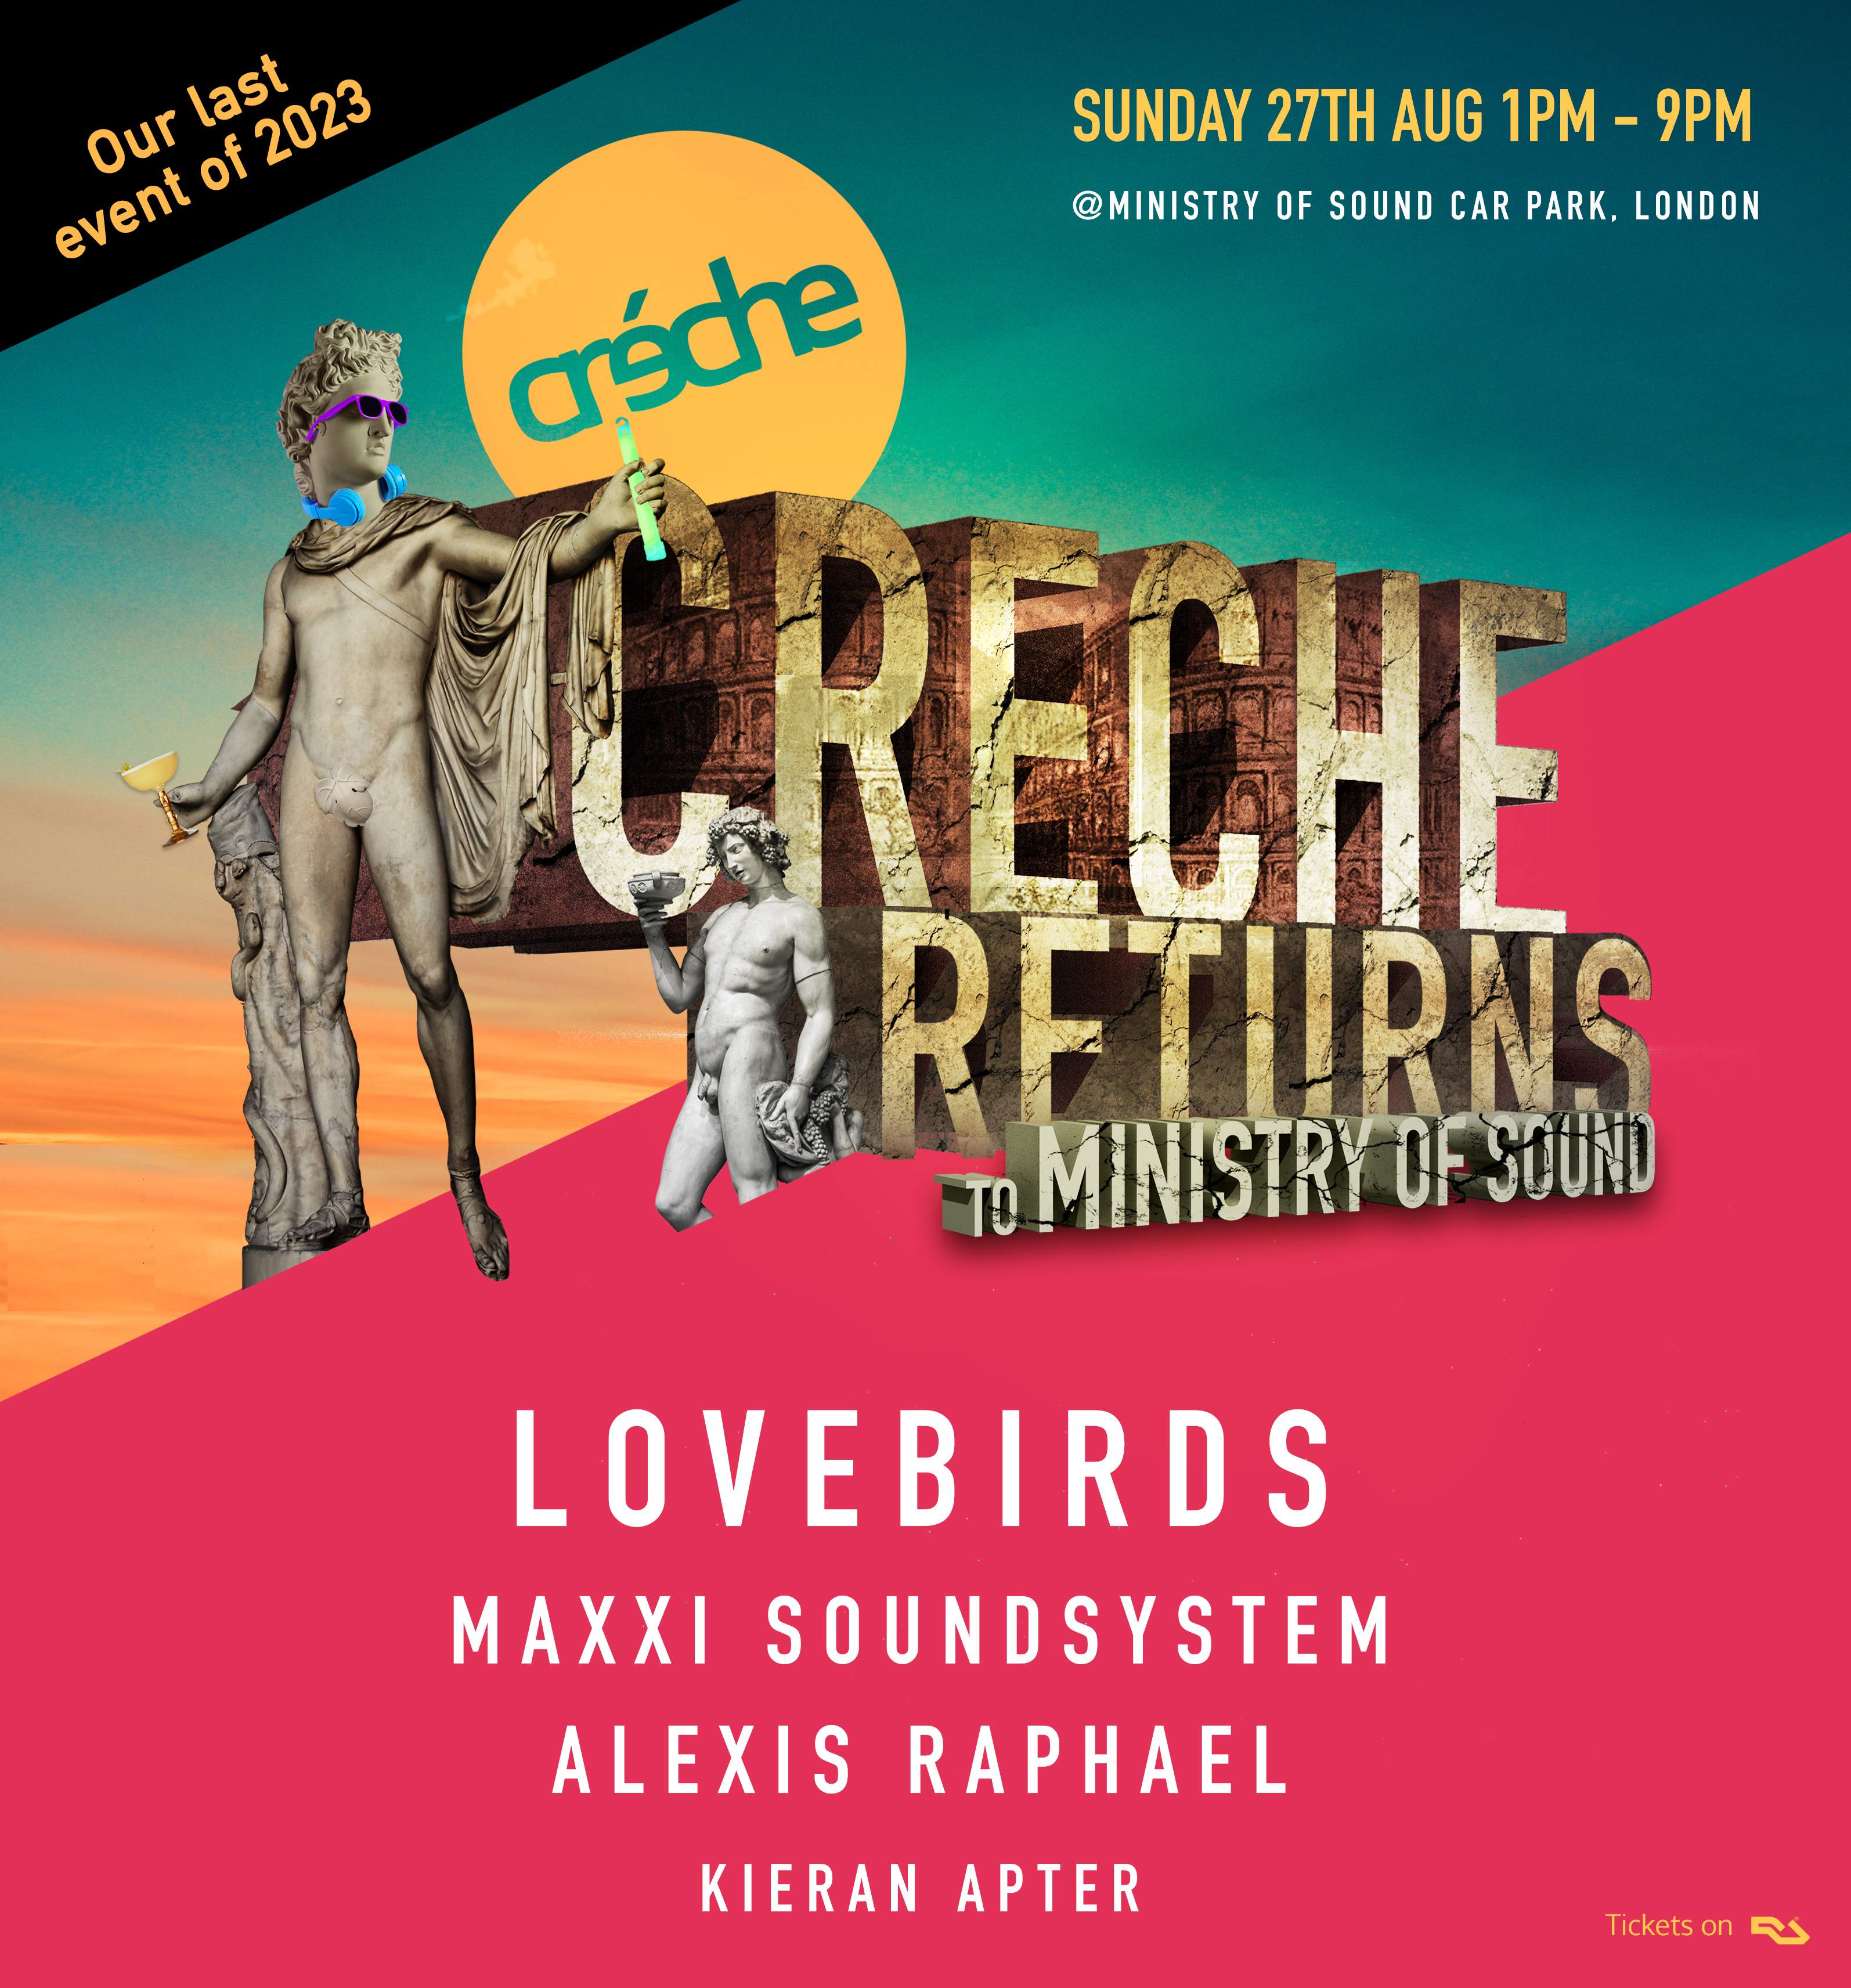 [CANCELLED] Creche All Day Outdoor Rave at Ministry Of Sound Car Park - Página frontal